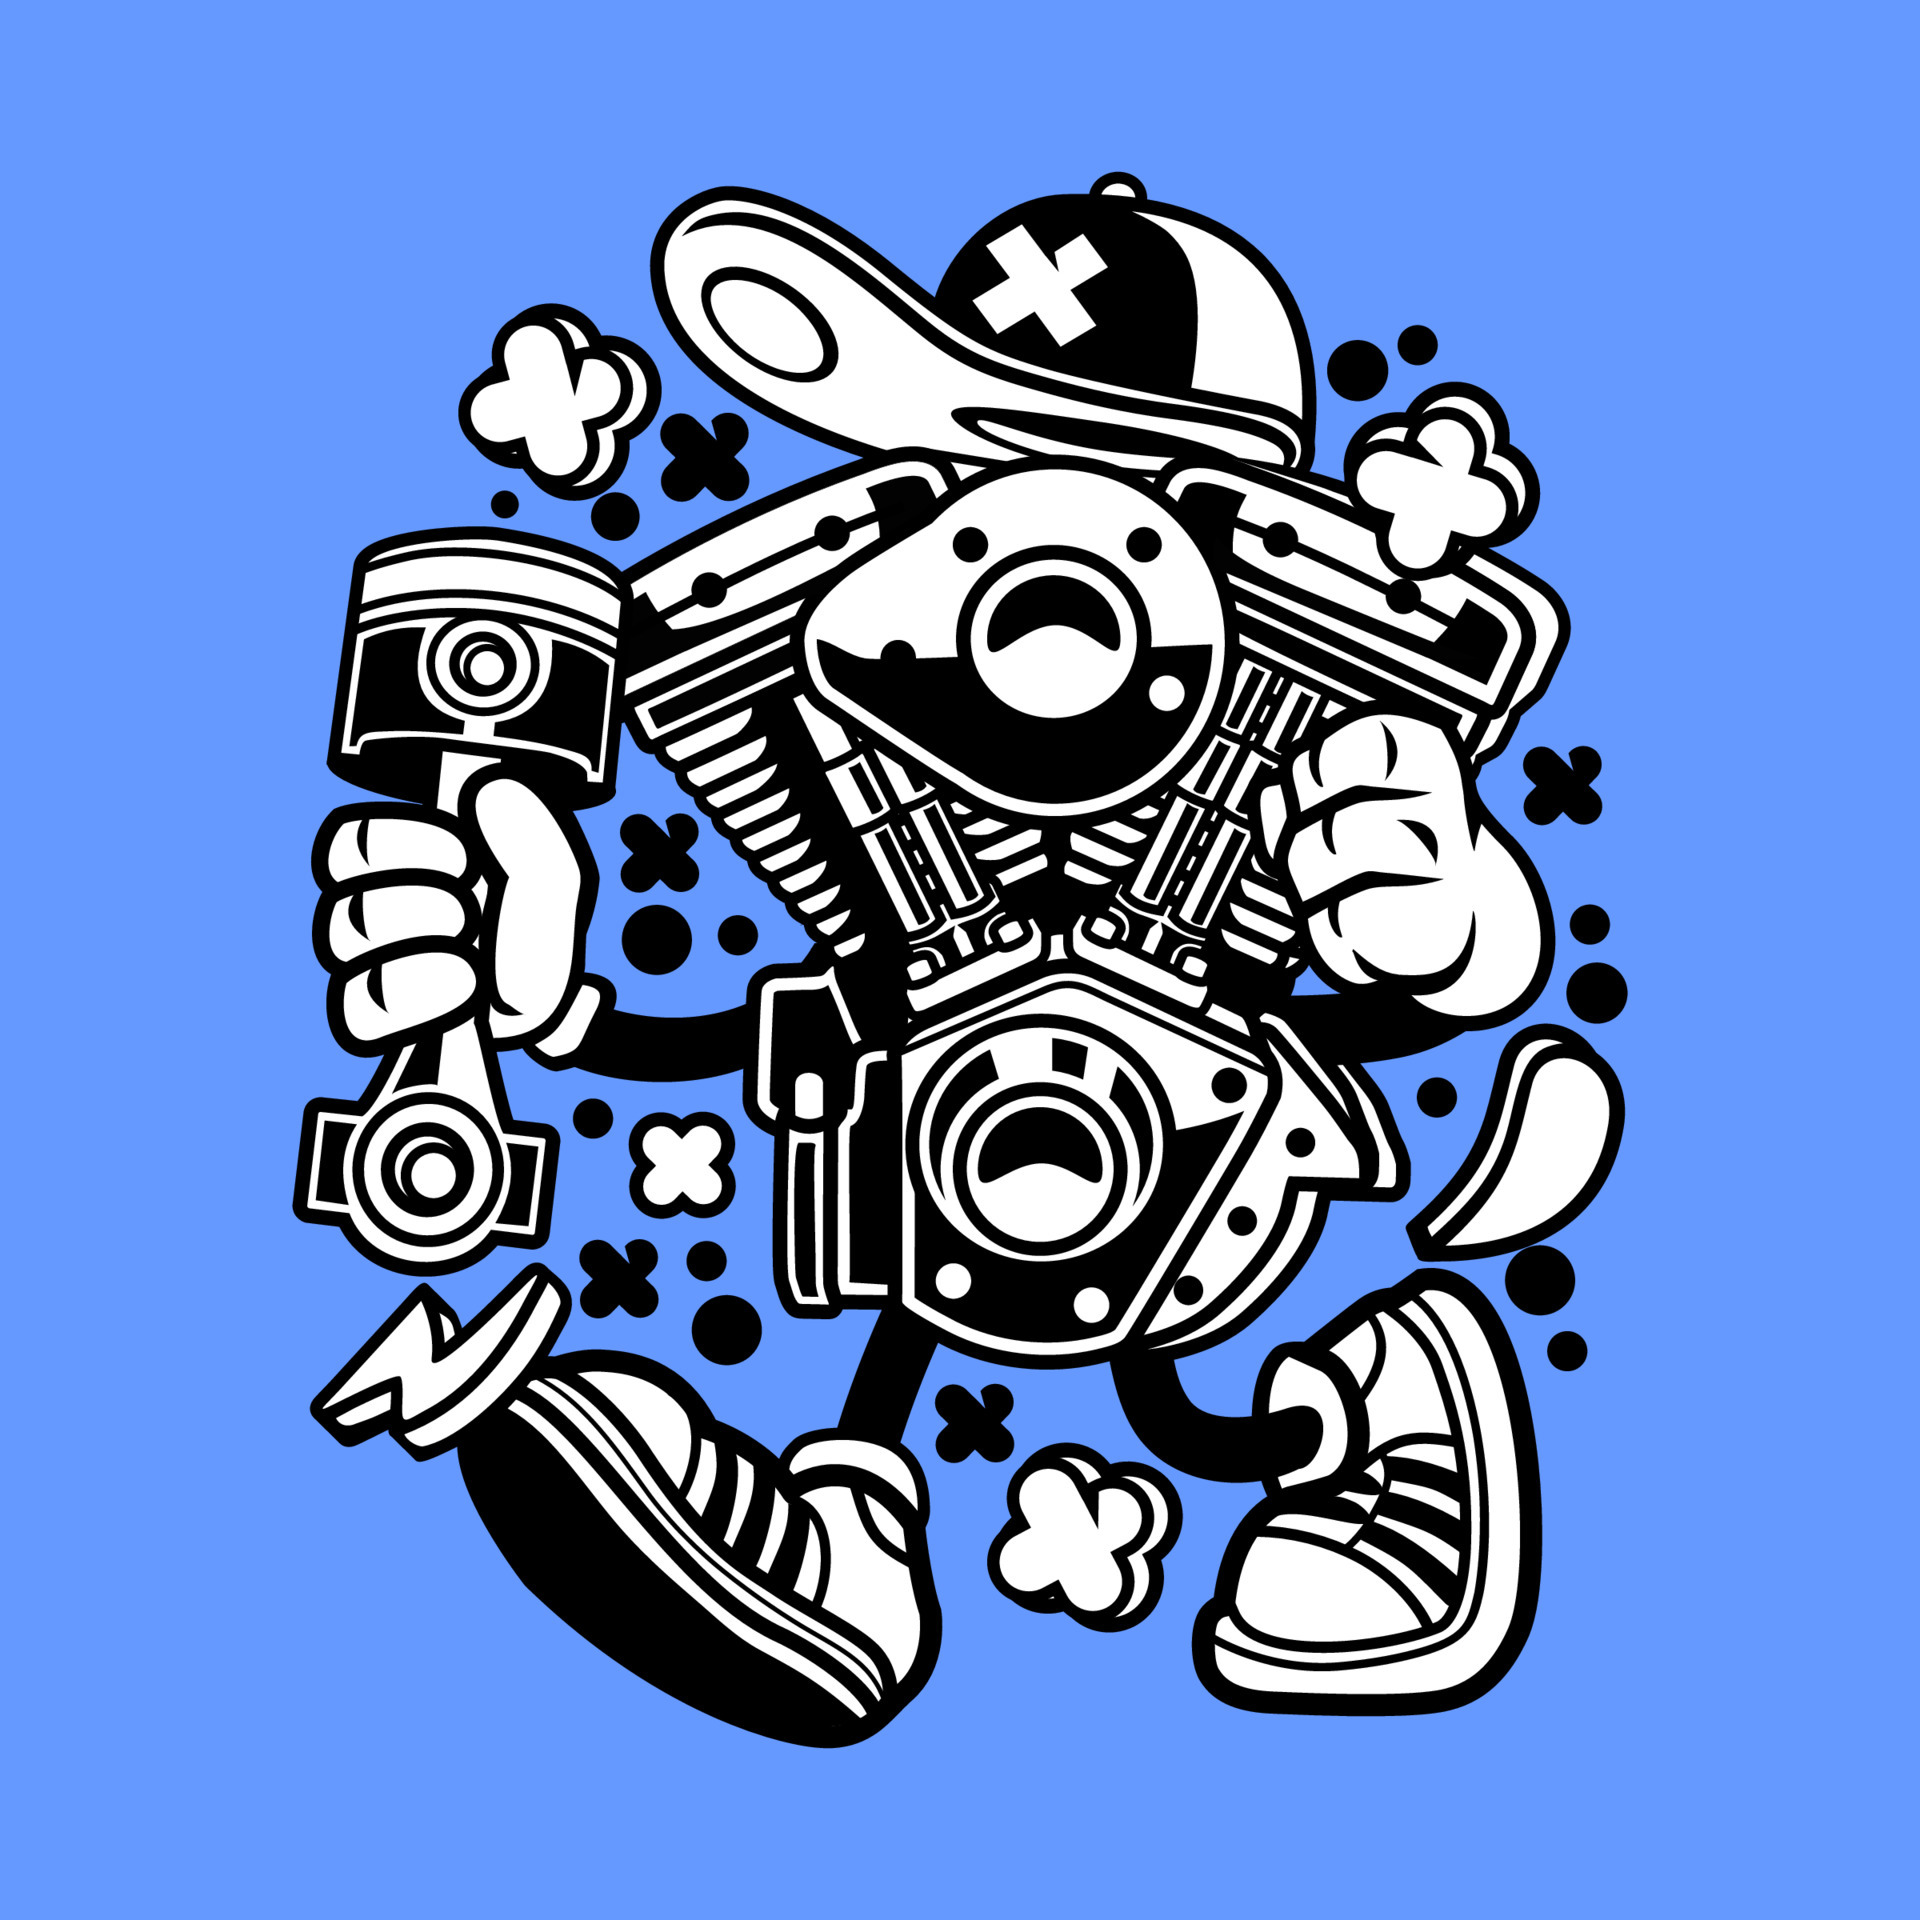 Cool vector cartoon design of a robot that looks like a machine and ...